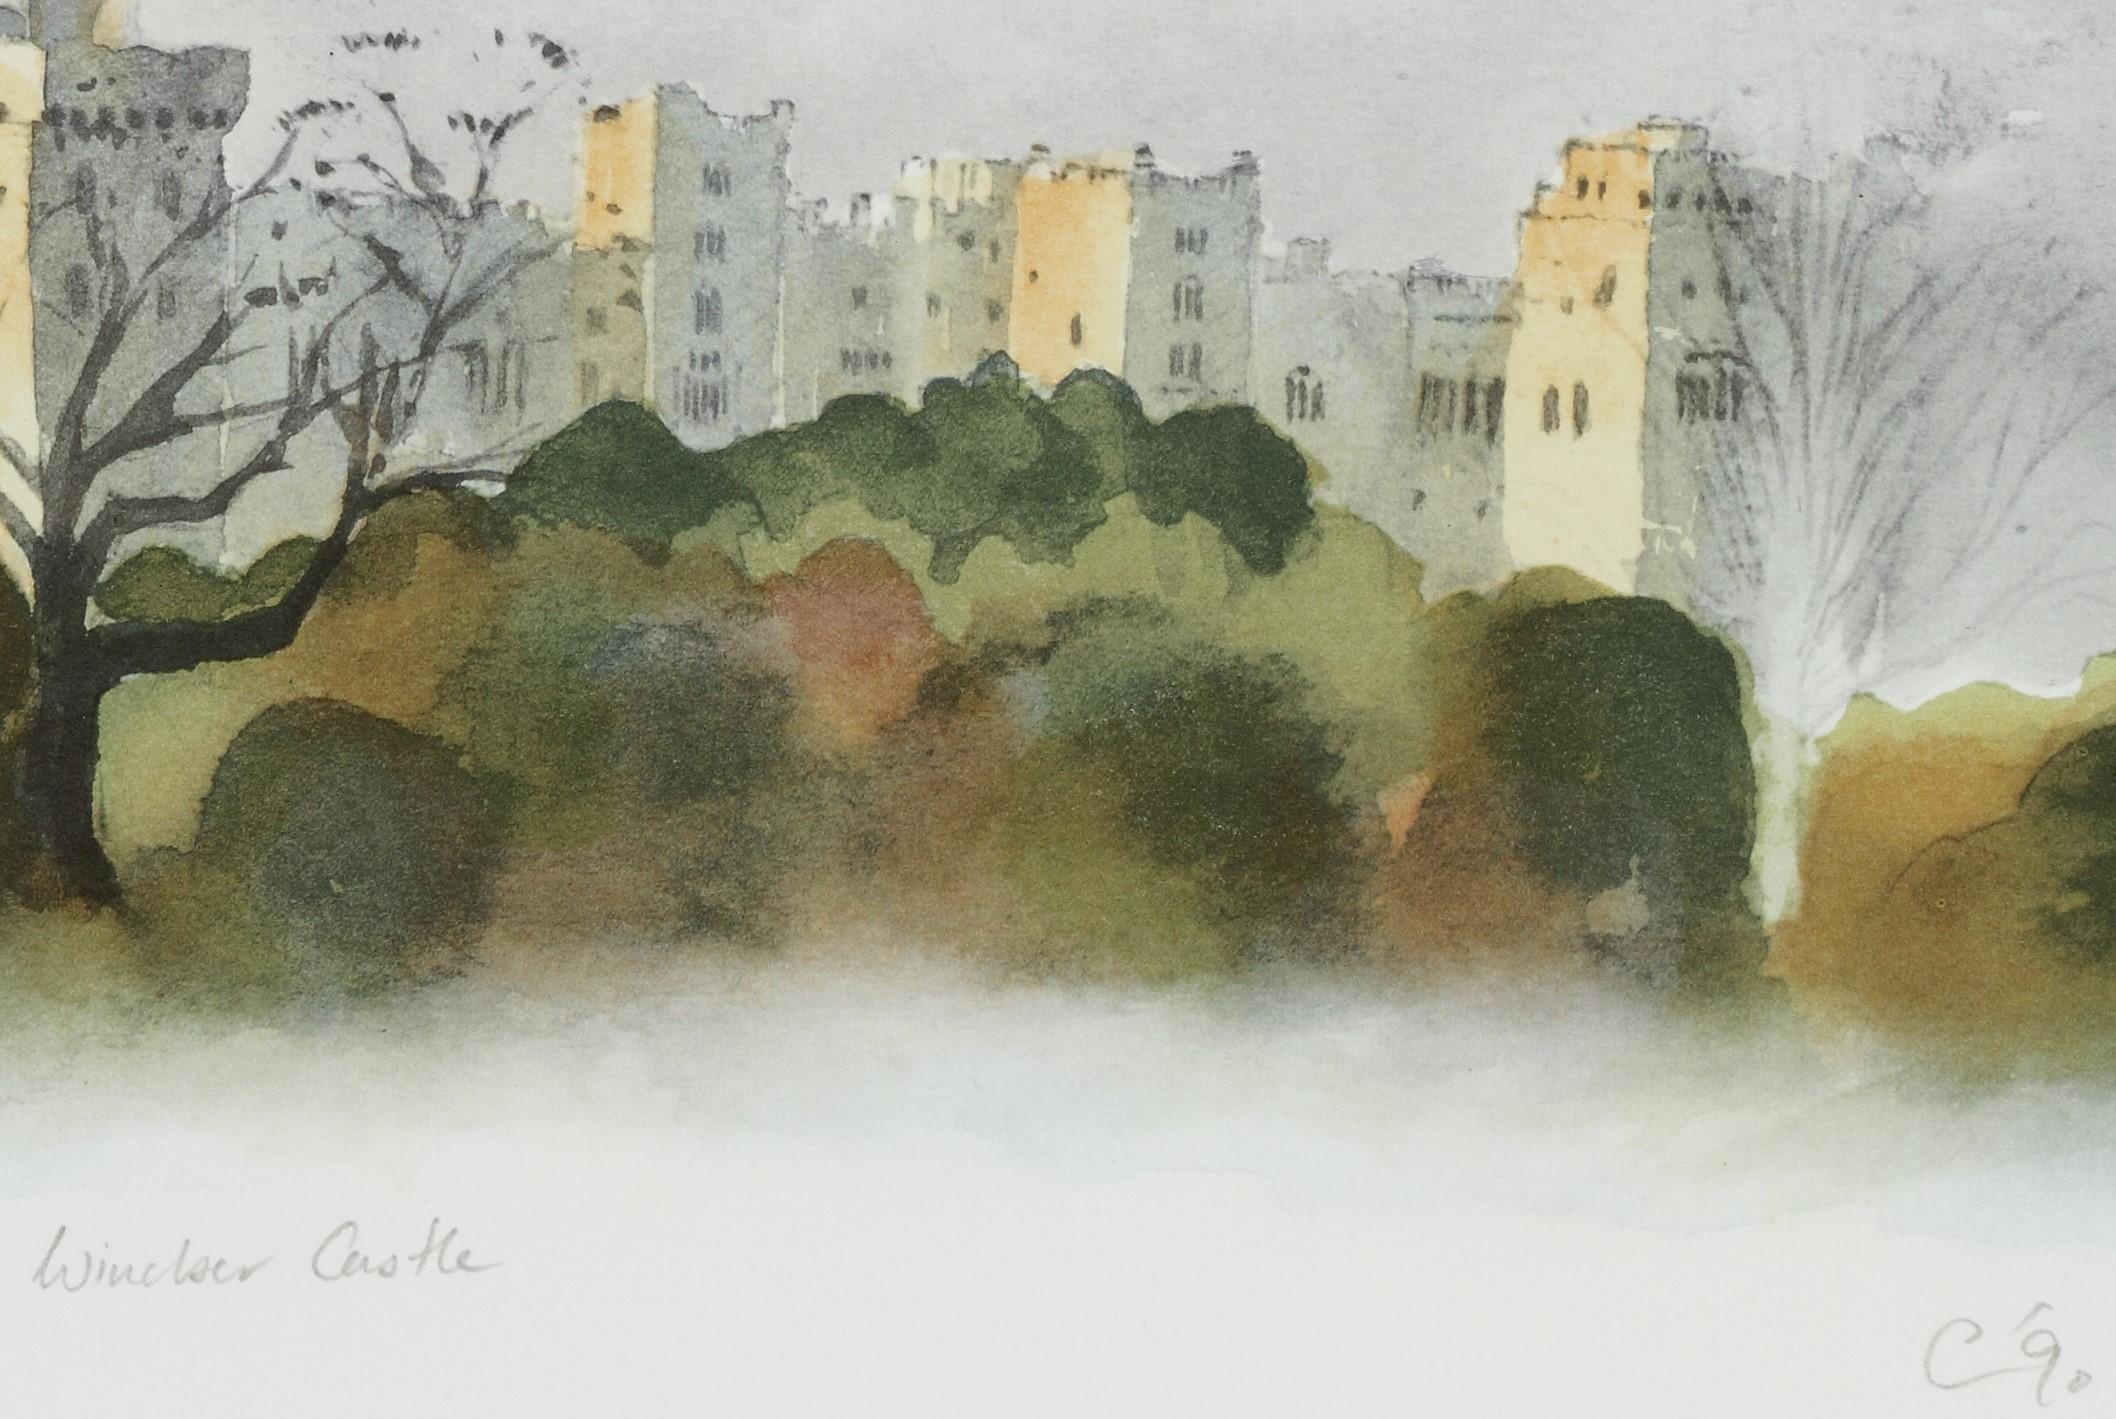 Windsor Castle - Signierte Lithographie, Royal Art, Royal Art, Royal Homes,Windsor Castle, Britisch – Print von His Majesty King Charles III